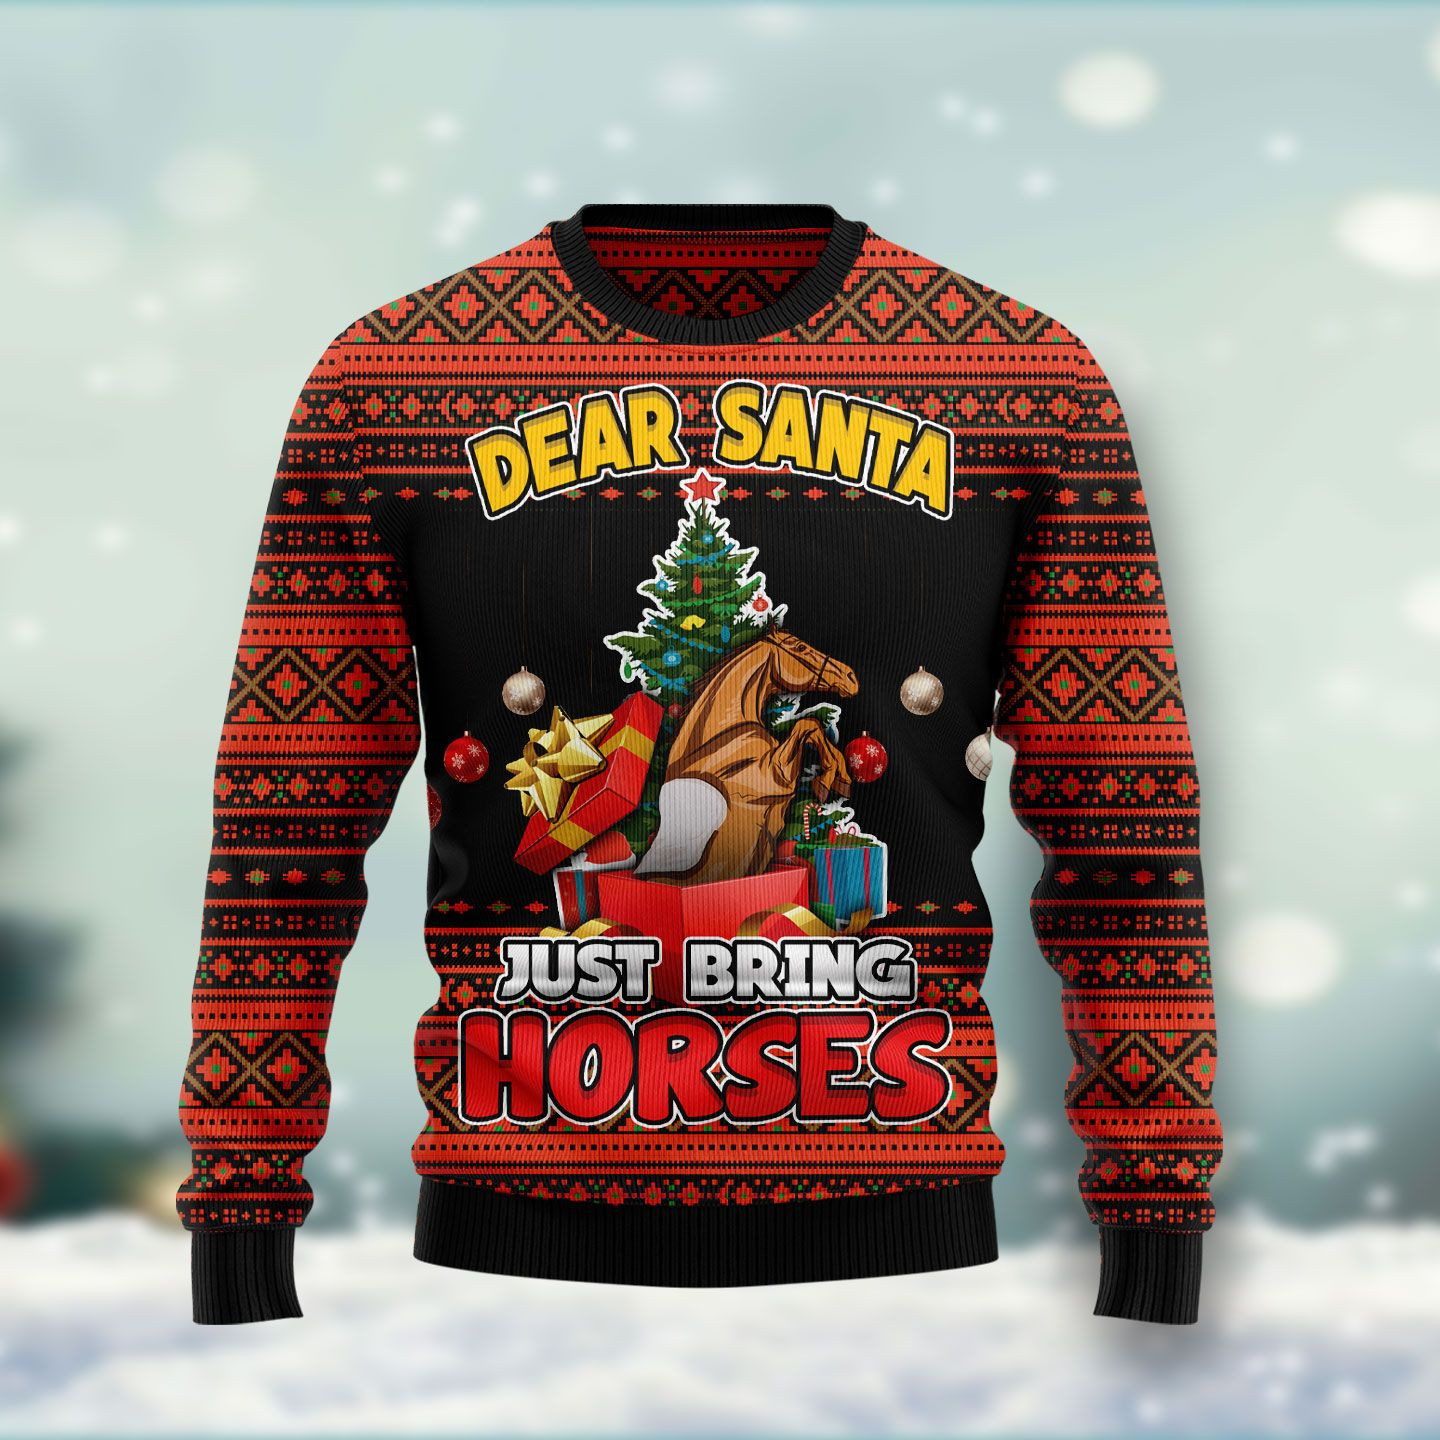 Dear Santa Just Bring Horses Ugly Christmas Sweater Ugly Sweater For Men Women, Holiday Sweater